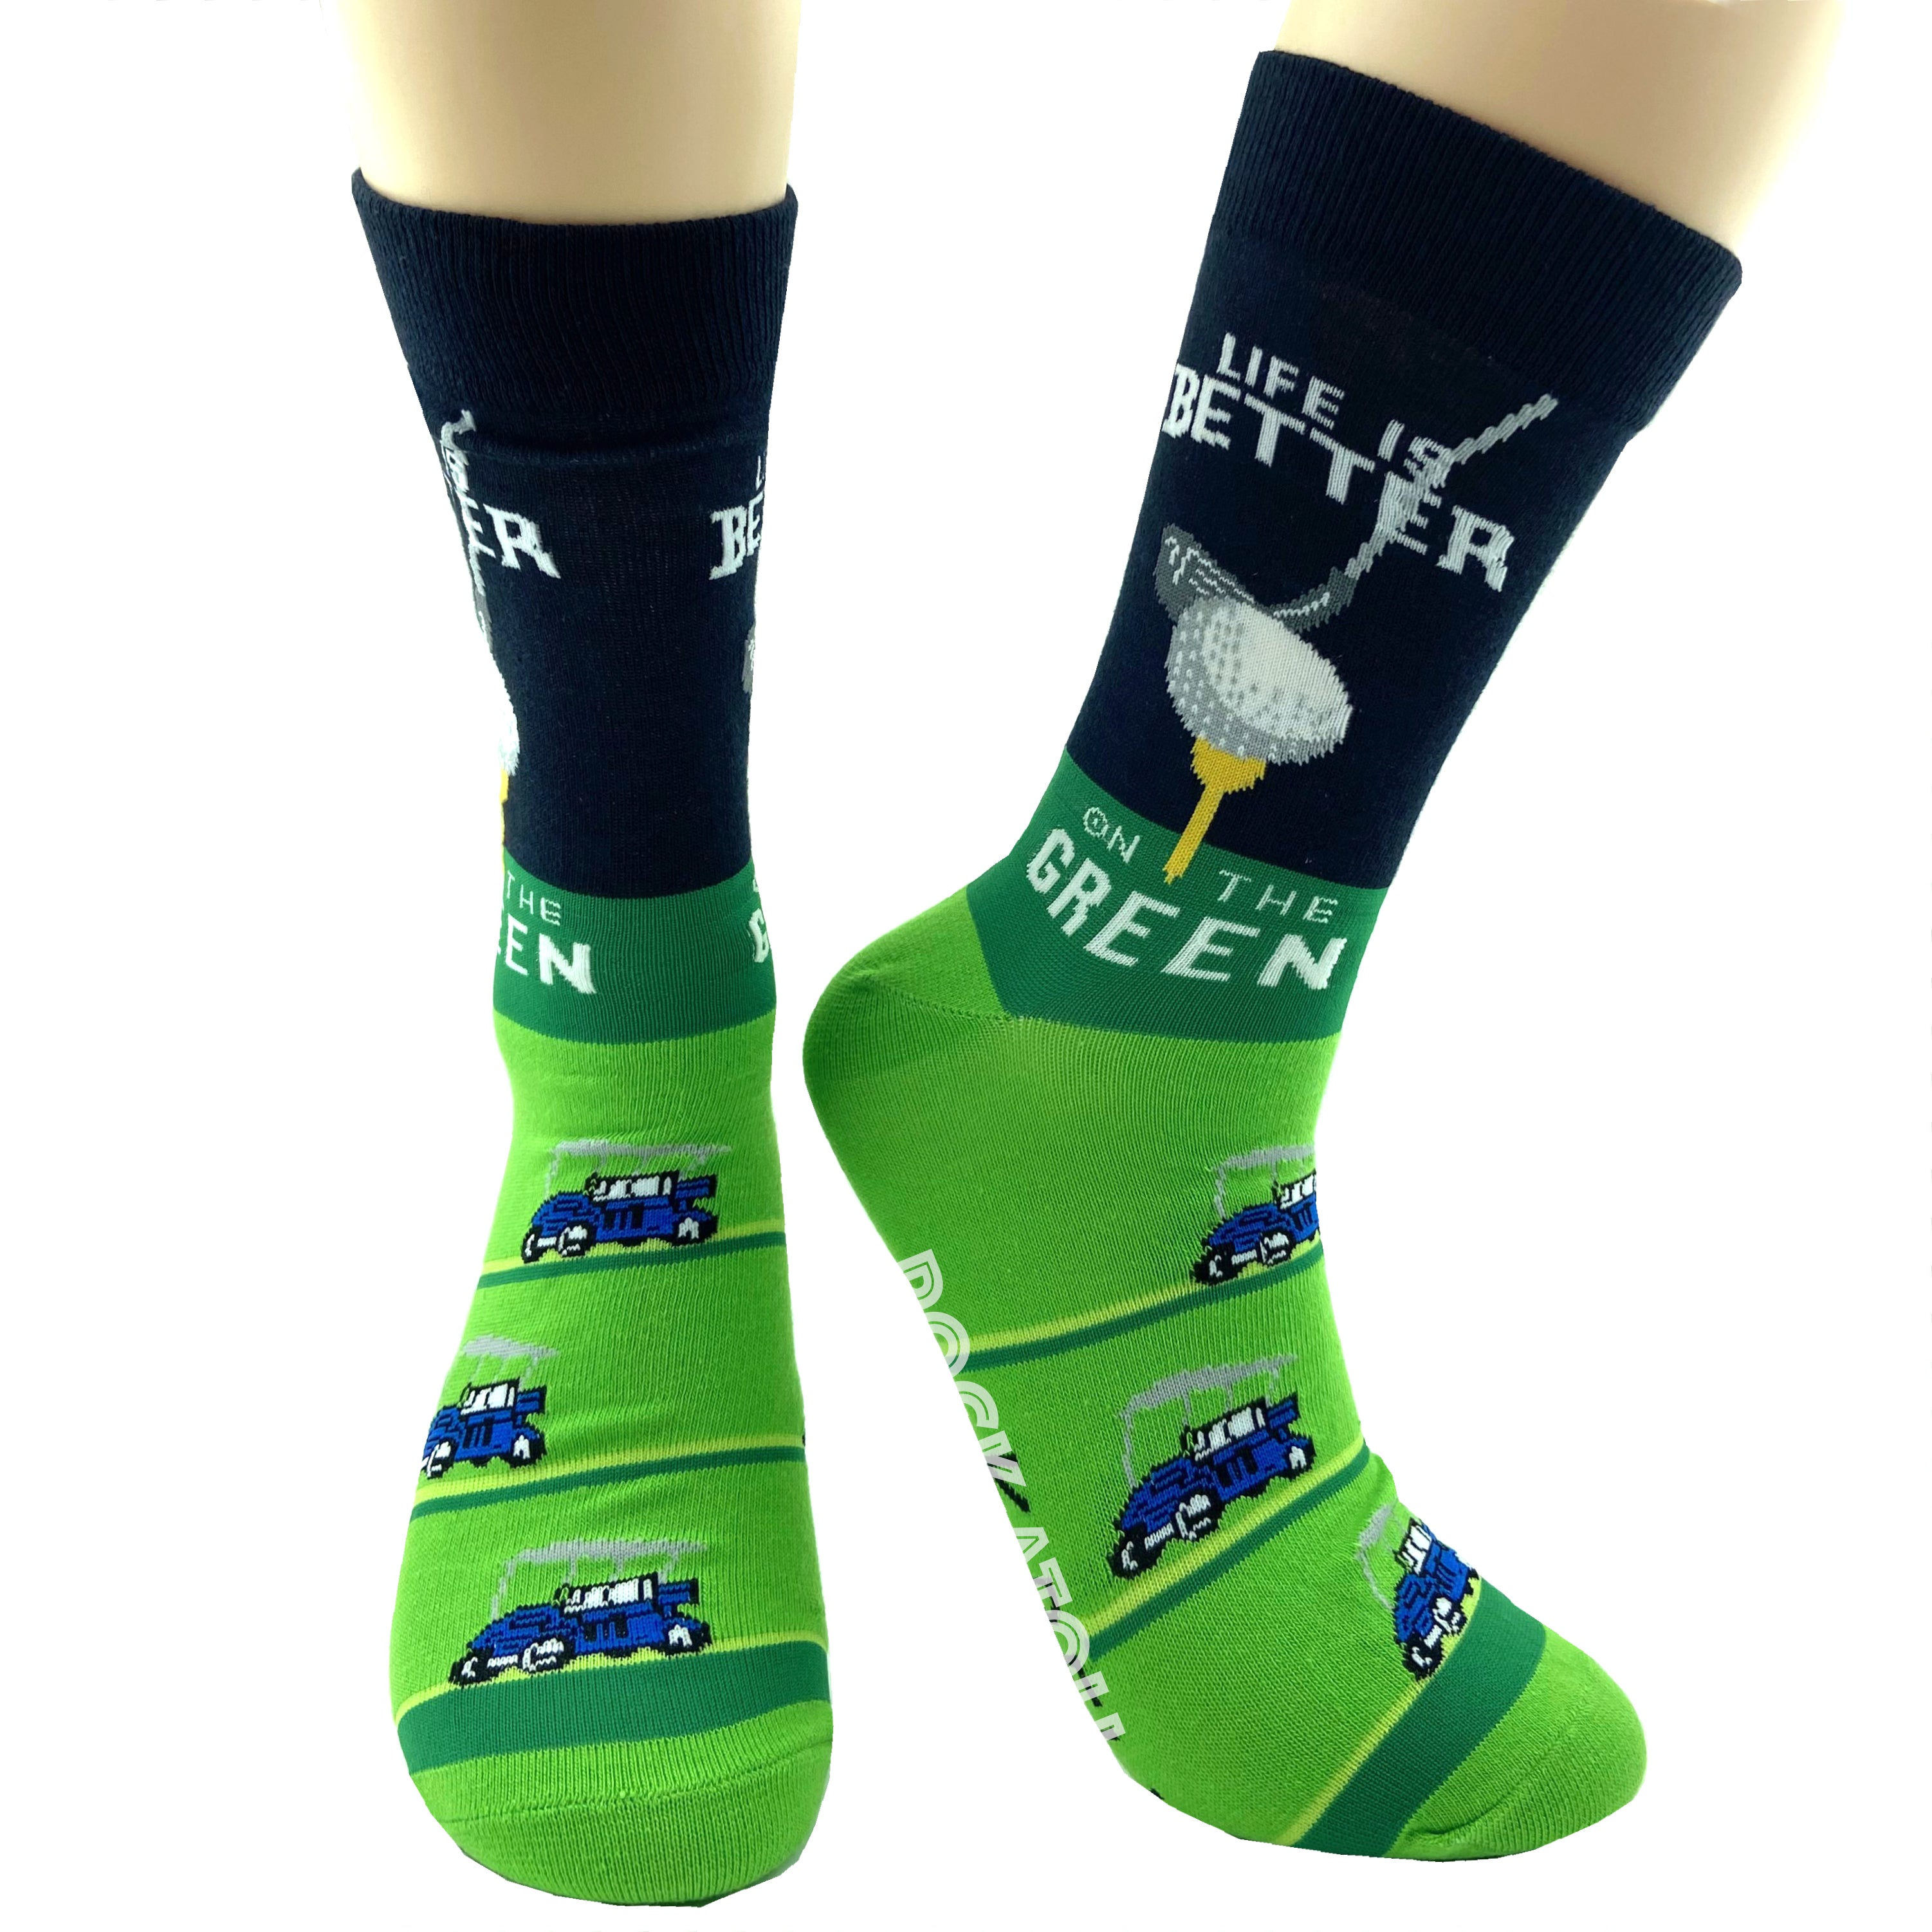 Unisex Golf Tee Golf Carts Patterned Novelty Crew Socks for Golfers